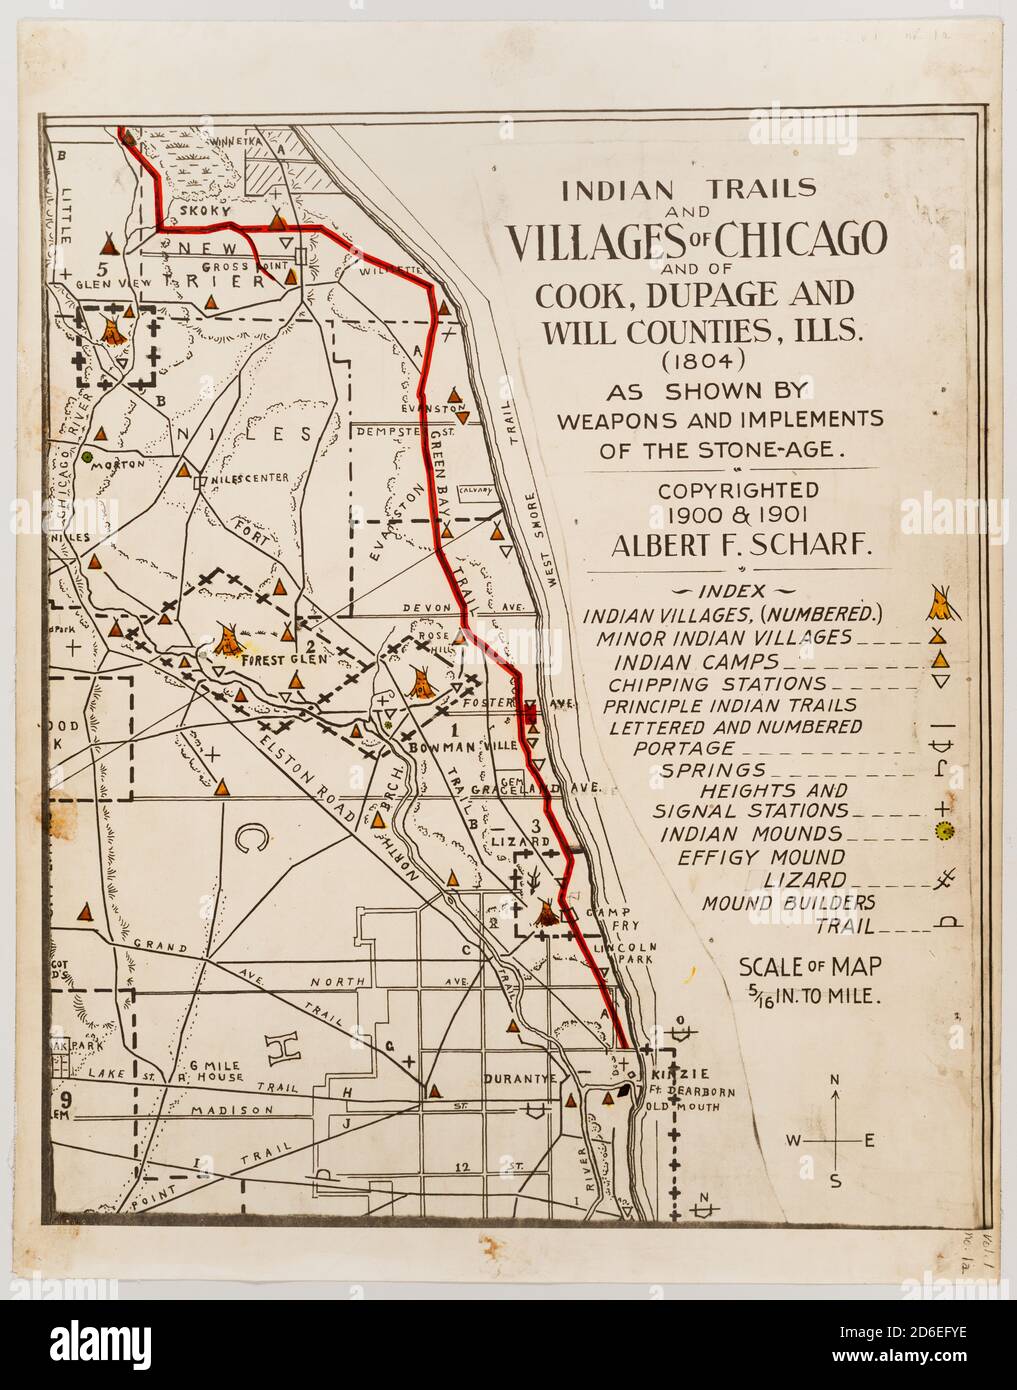 Map Of American Indian Trails And Villages Of Chicago Illinois And Cook Dupage And Will 0233